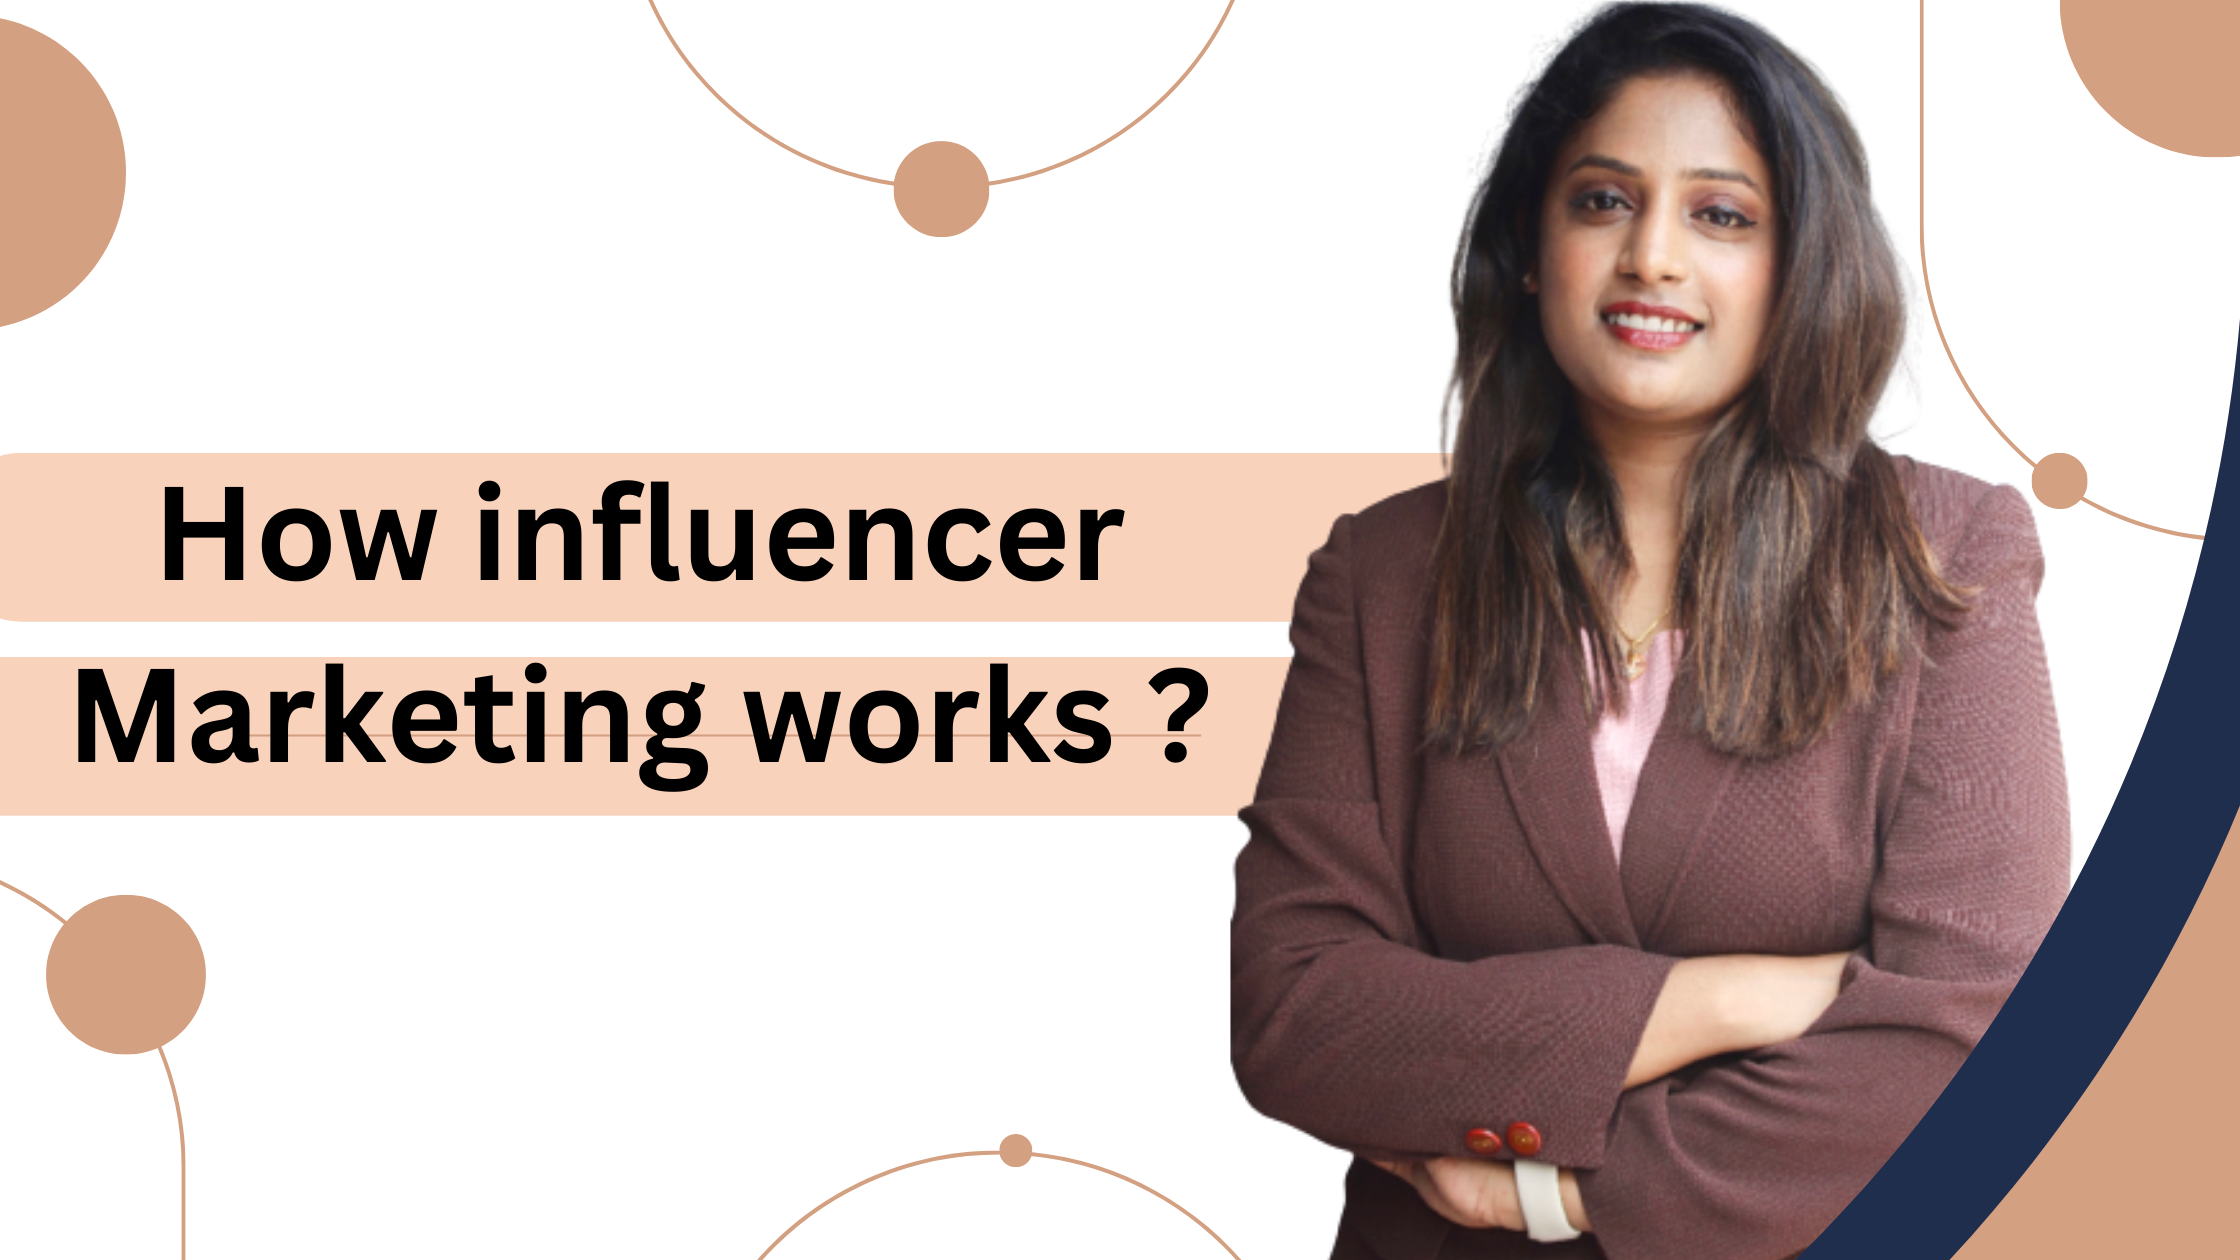 This is a Image blog banner of how influencer marketing works